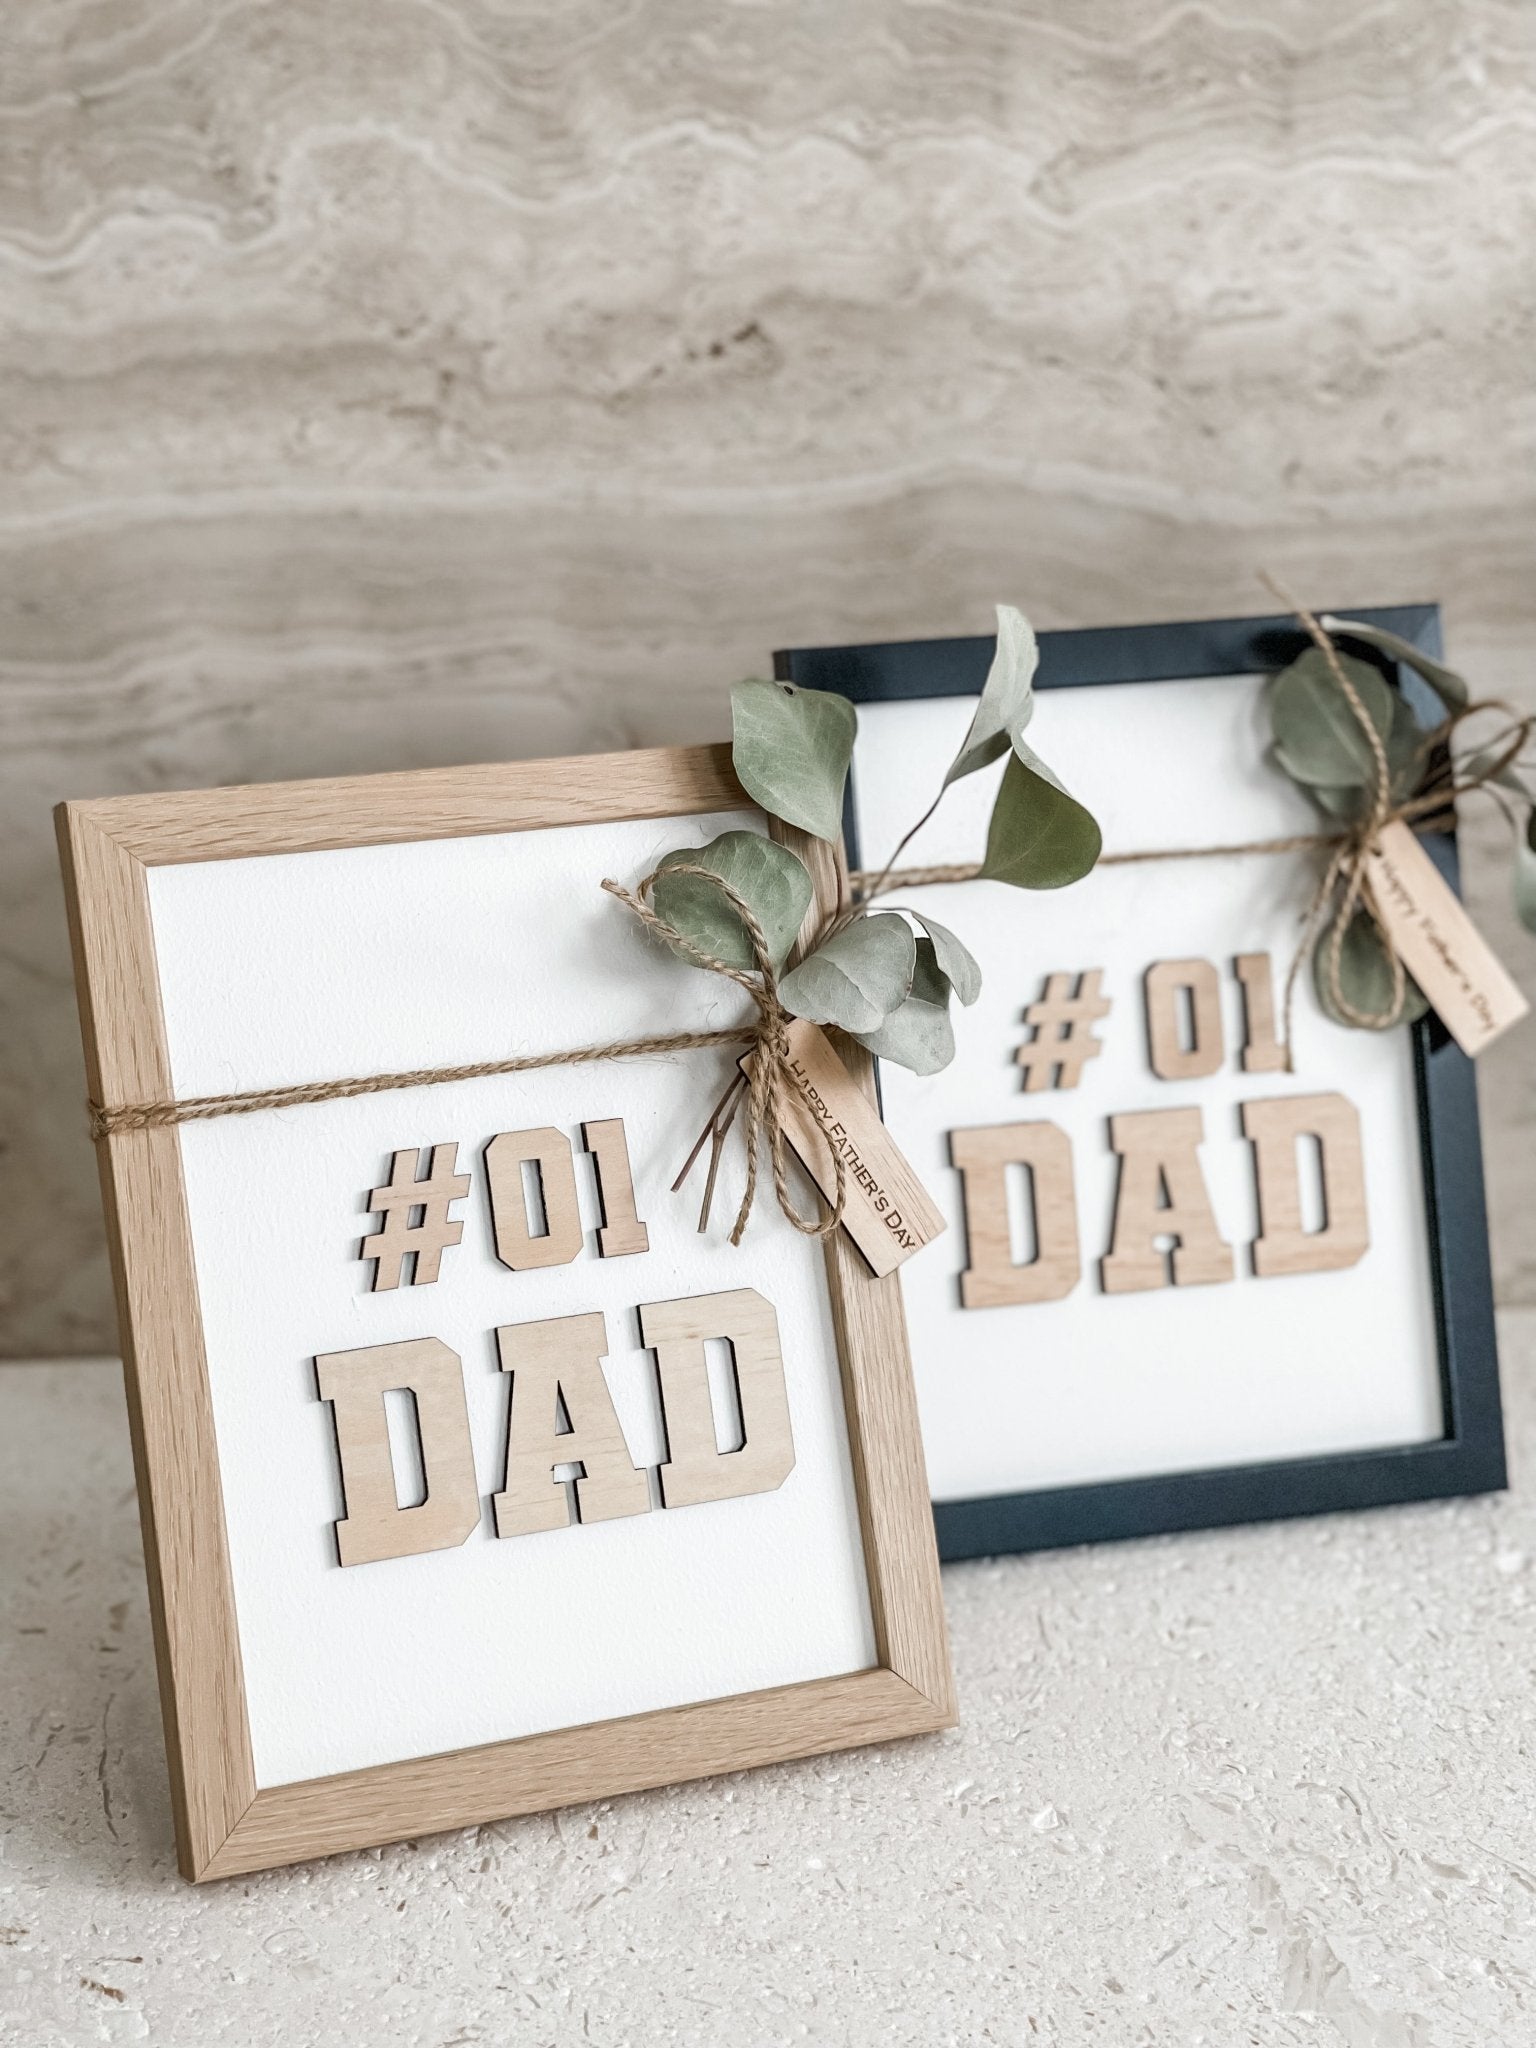 #1 Dad Photo Frame - The Humble Gift Co.